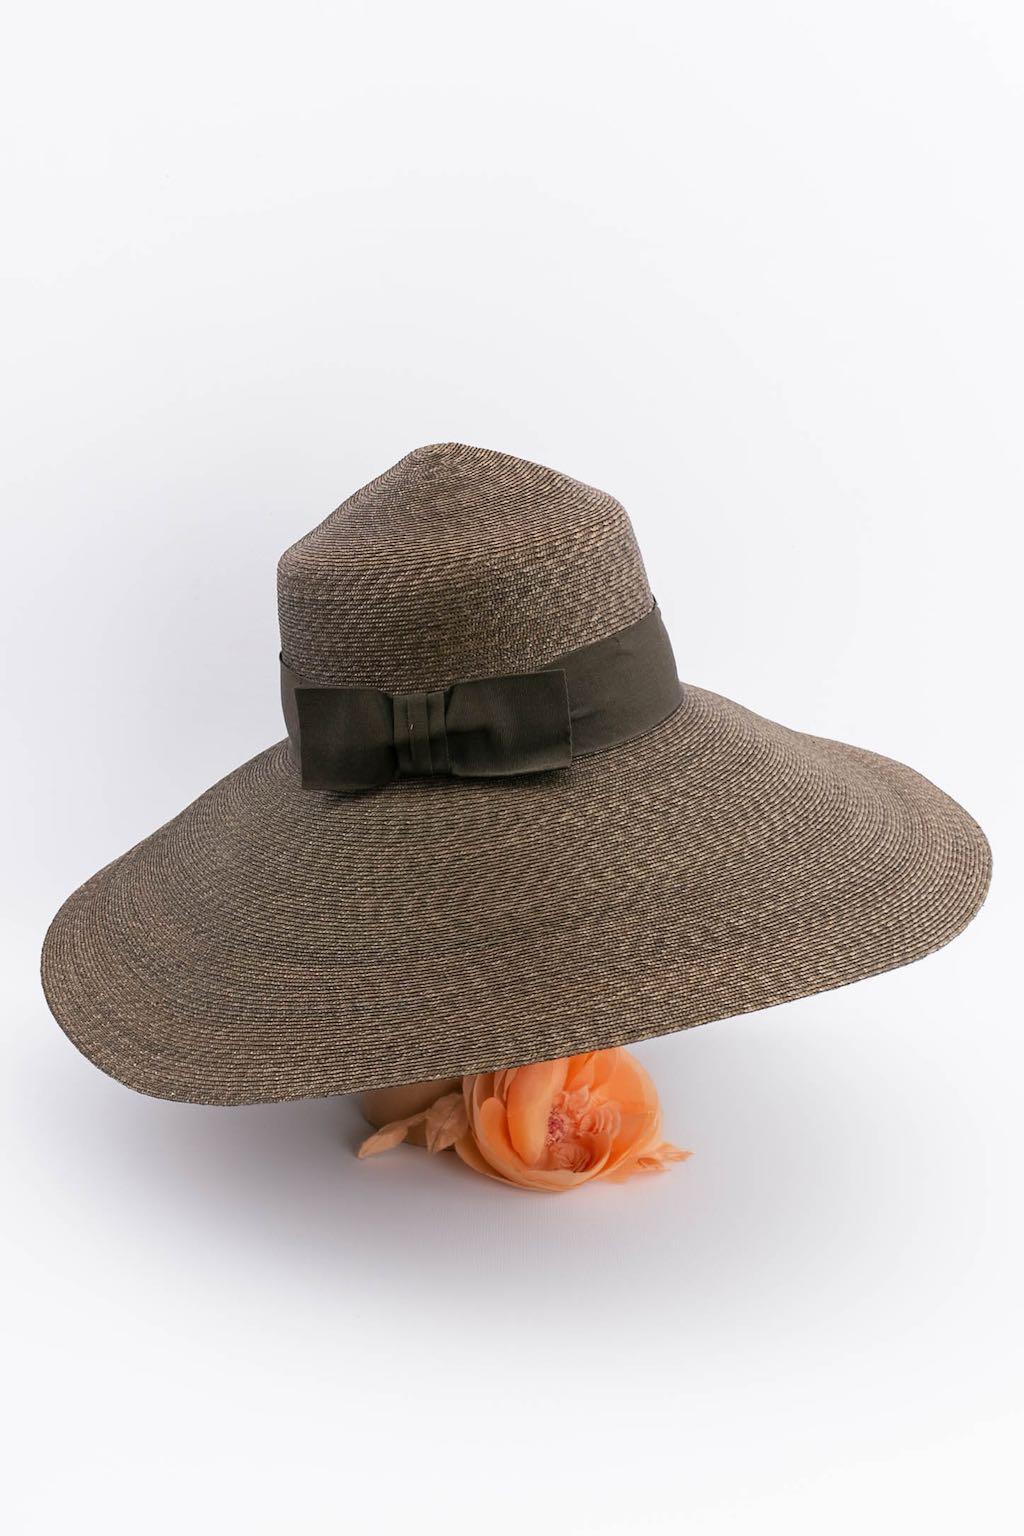 Gianni Versace Wide Brim Hat in Straw For Sale 2